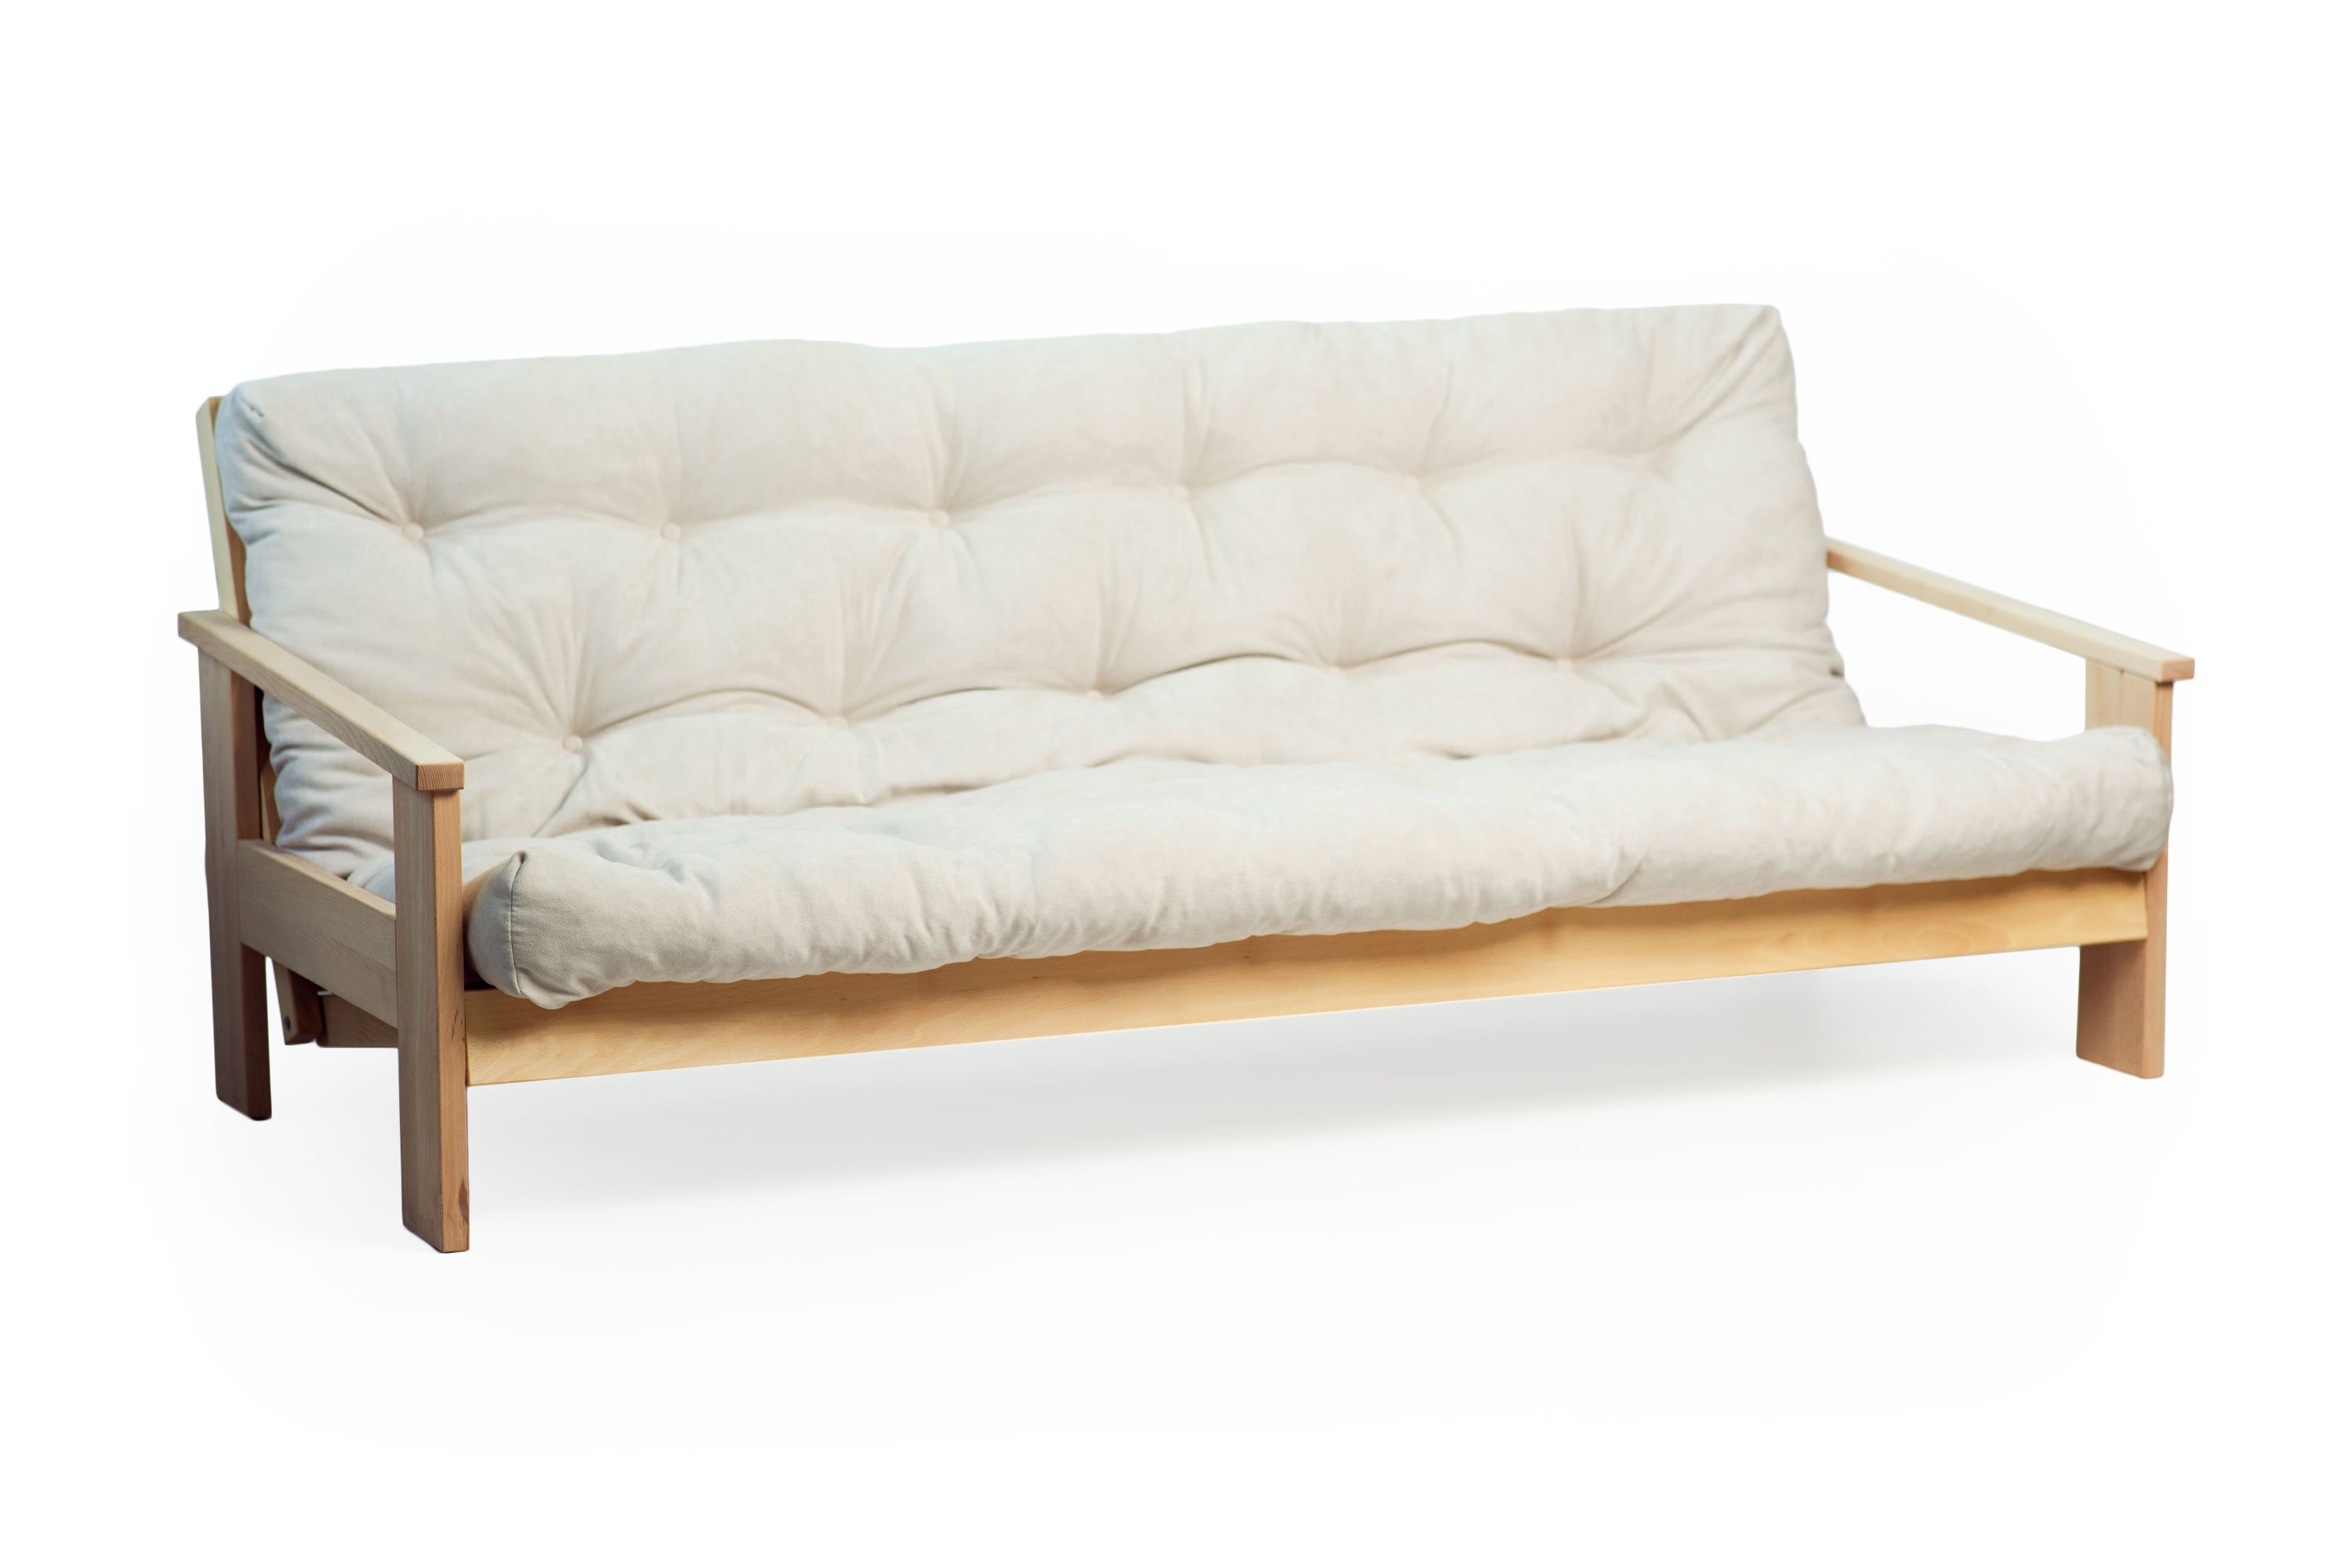 Dygn Futon Frame Solid Beech Wood Full Size Hand Rub Natural Oil Finish by  Prestige